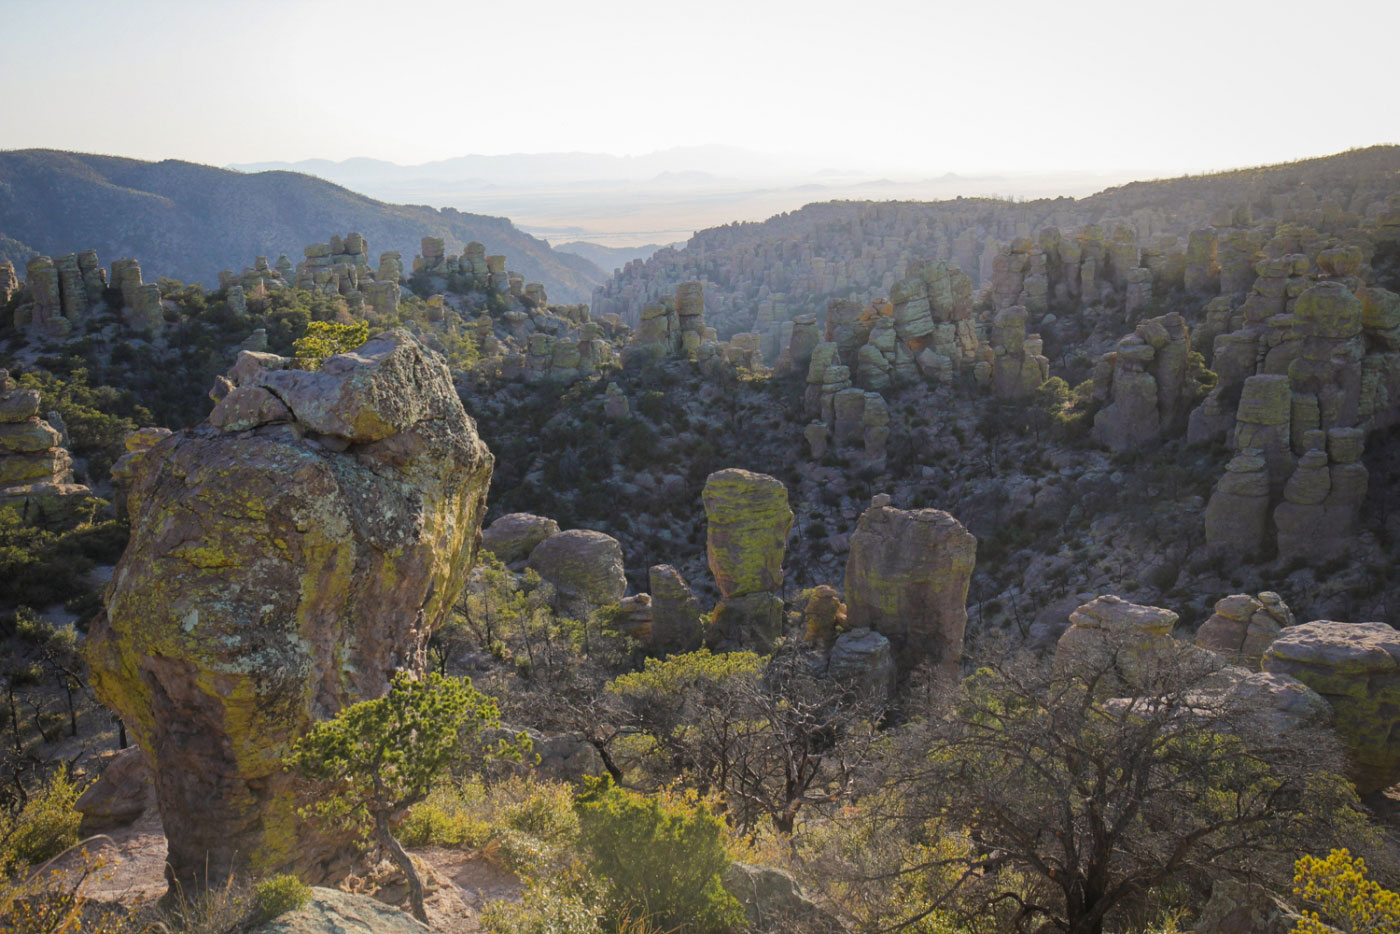 Hike Echo Canyon and Hailstone Loop in Chiricahua National Monument, Arizona - Stav is Lost